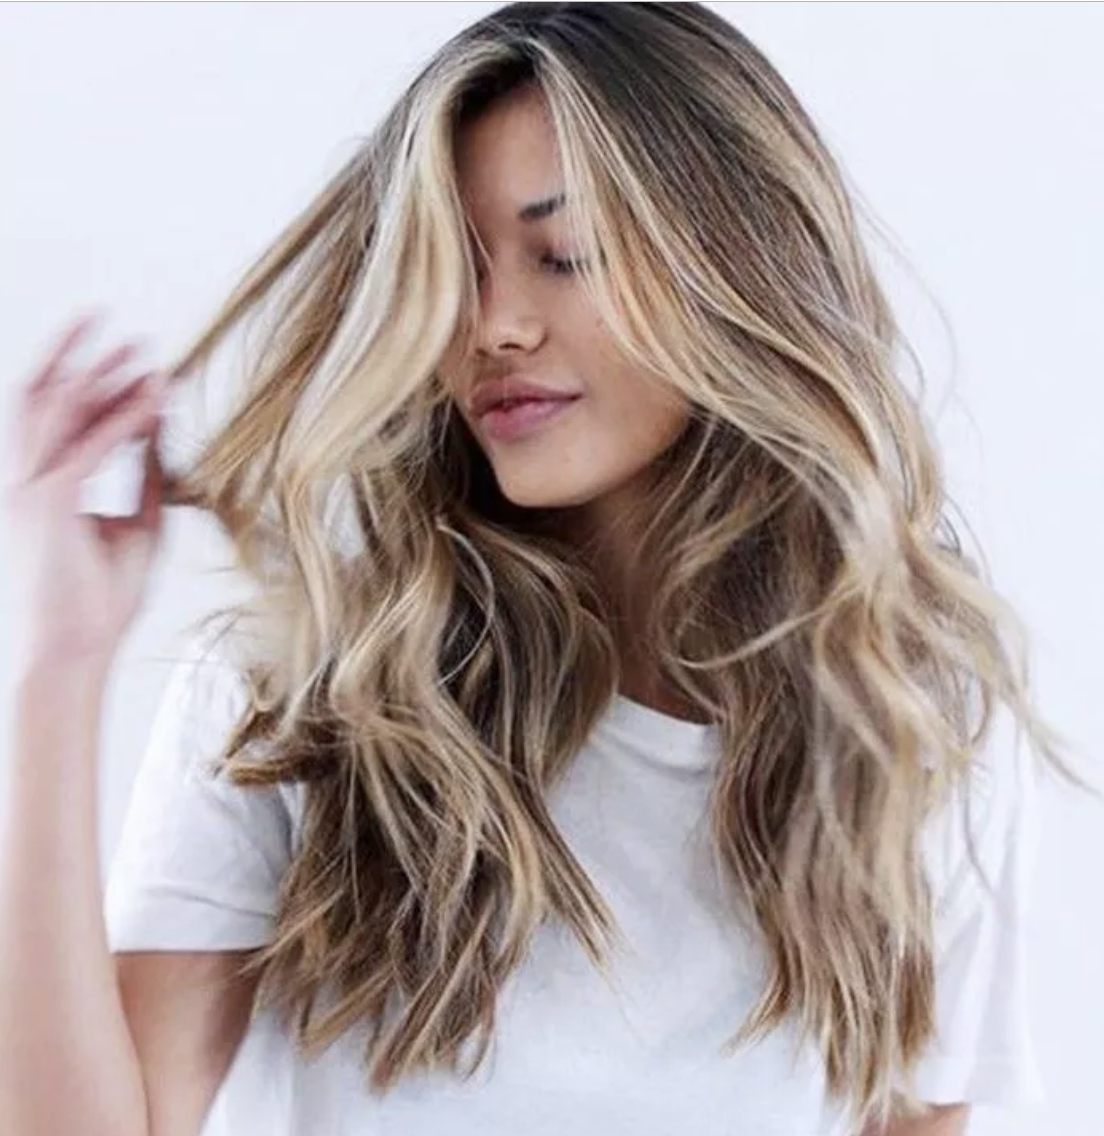 So, what’s the secret to melted, sun-kissed, surfer-girl hair color? 